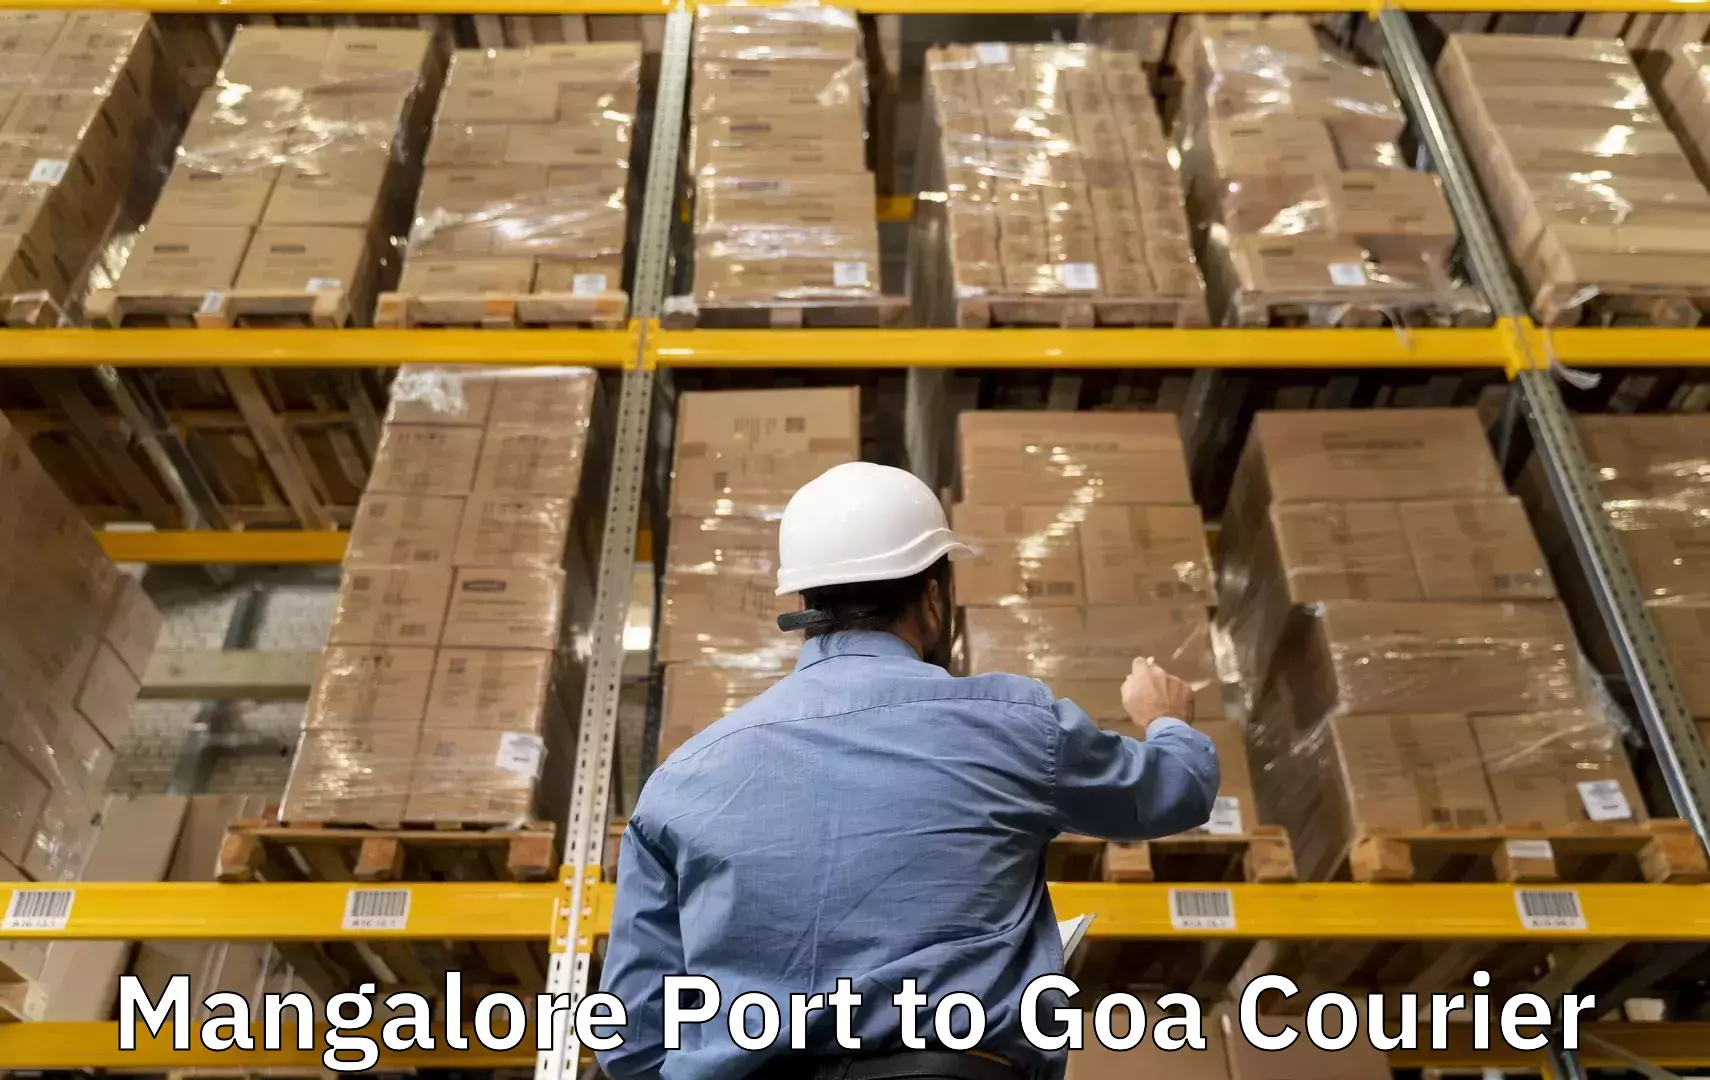 Luggage transport solutions Mangalore Port to South Goa